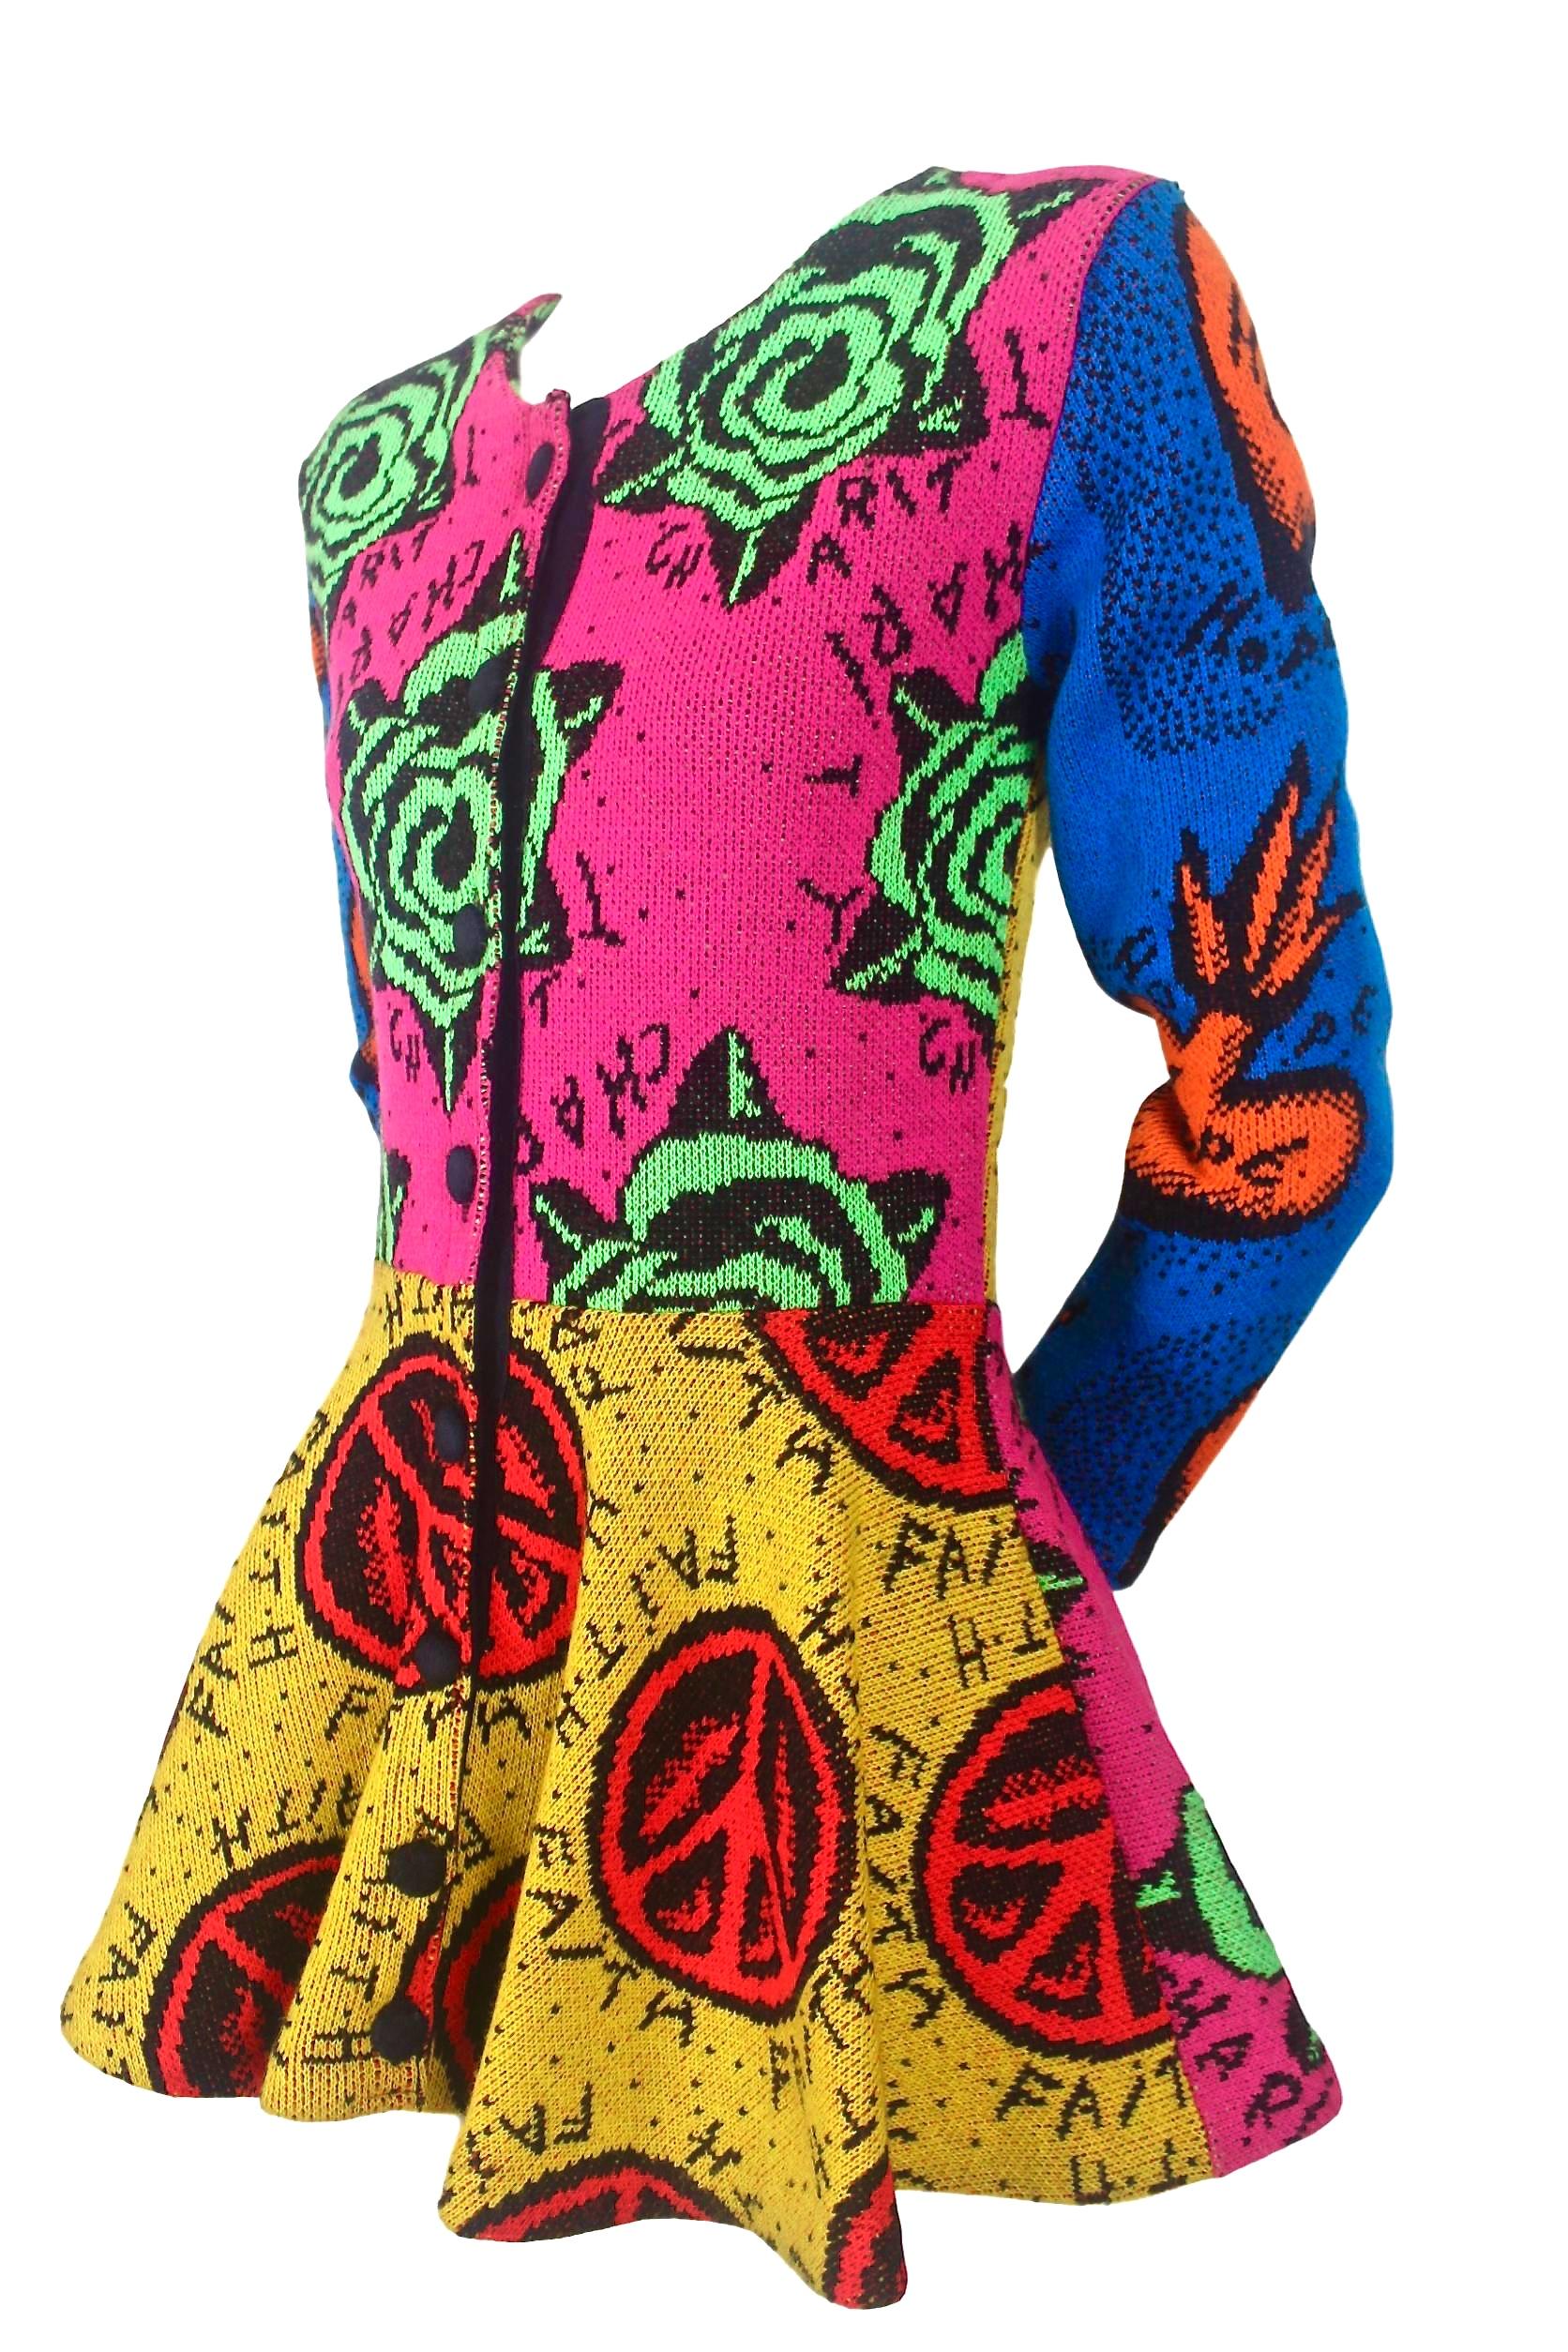 Original Betsey Johnson Colourful Peplum Knit Jacket Faith, Hope and Charity In Good Condition For Sale In Bath, GB